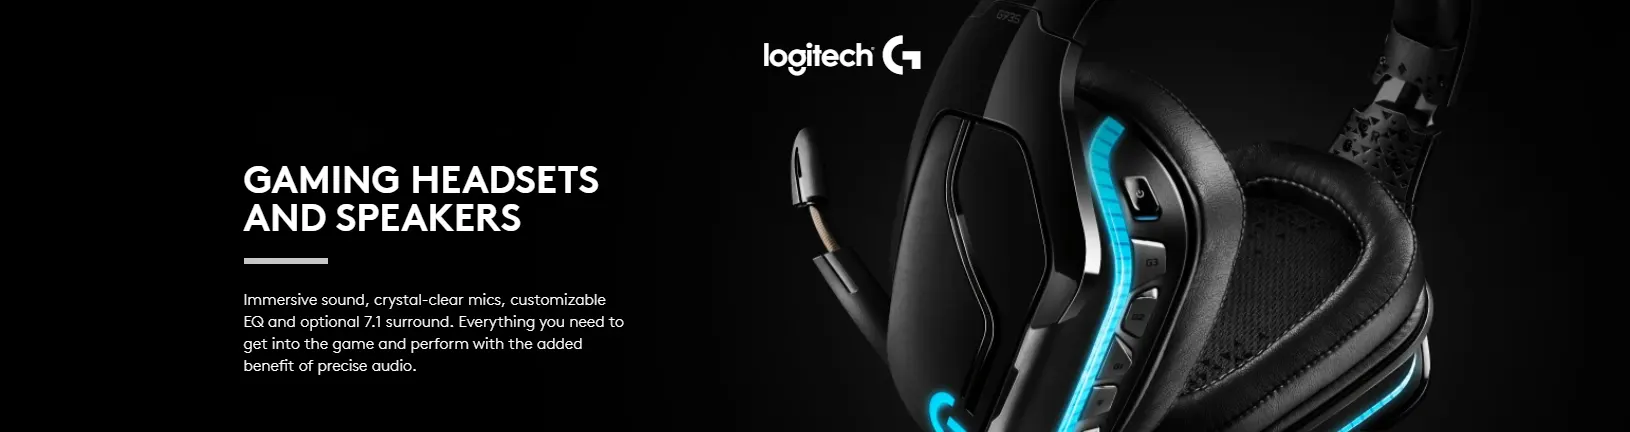 Logitech Gaming Headphones for PC, PlayStation and Xbox